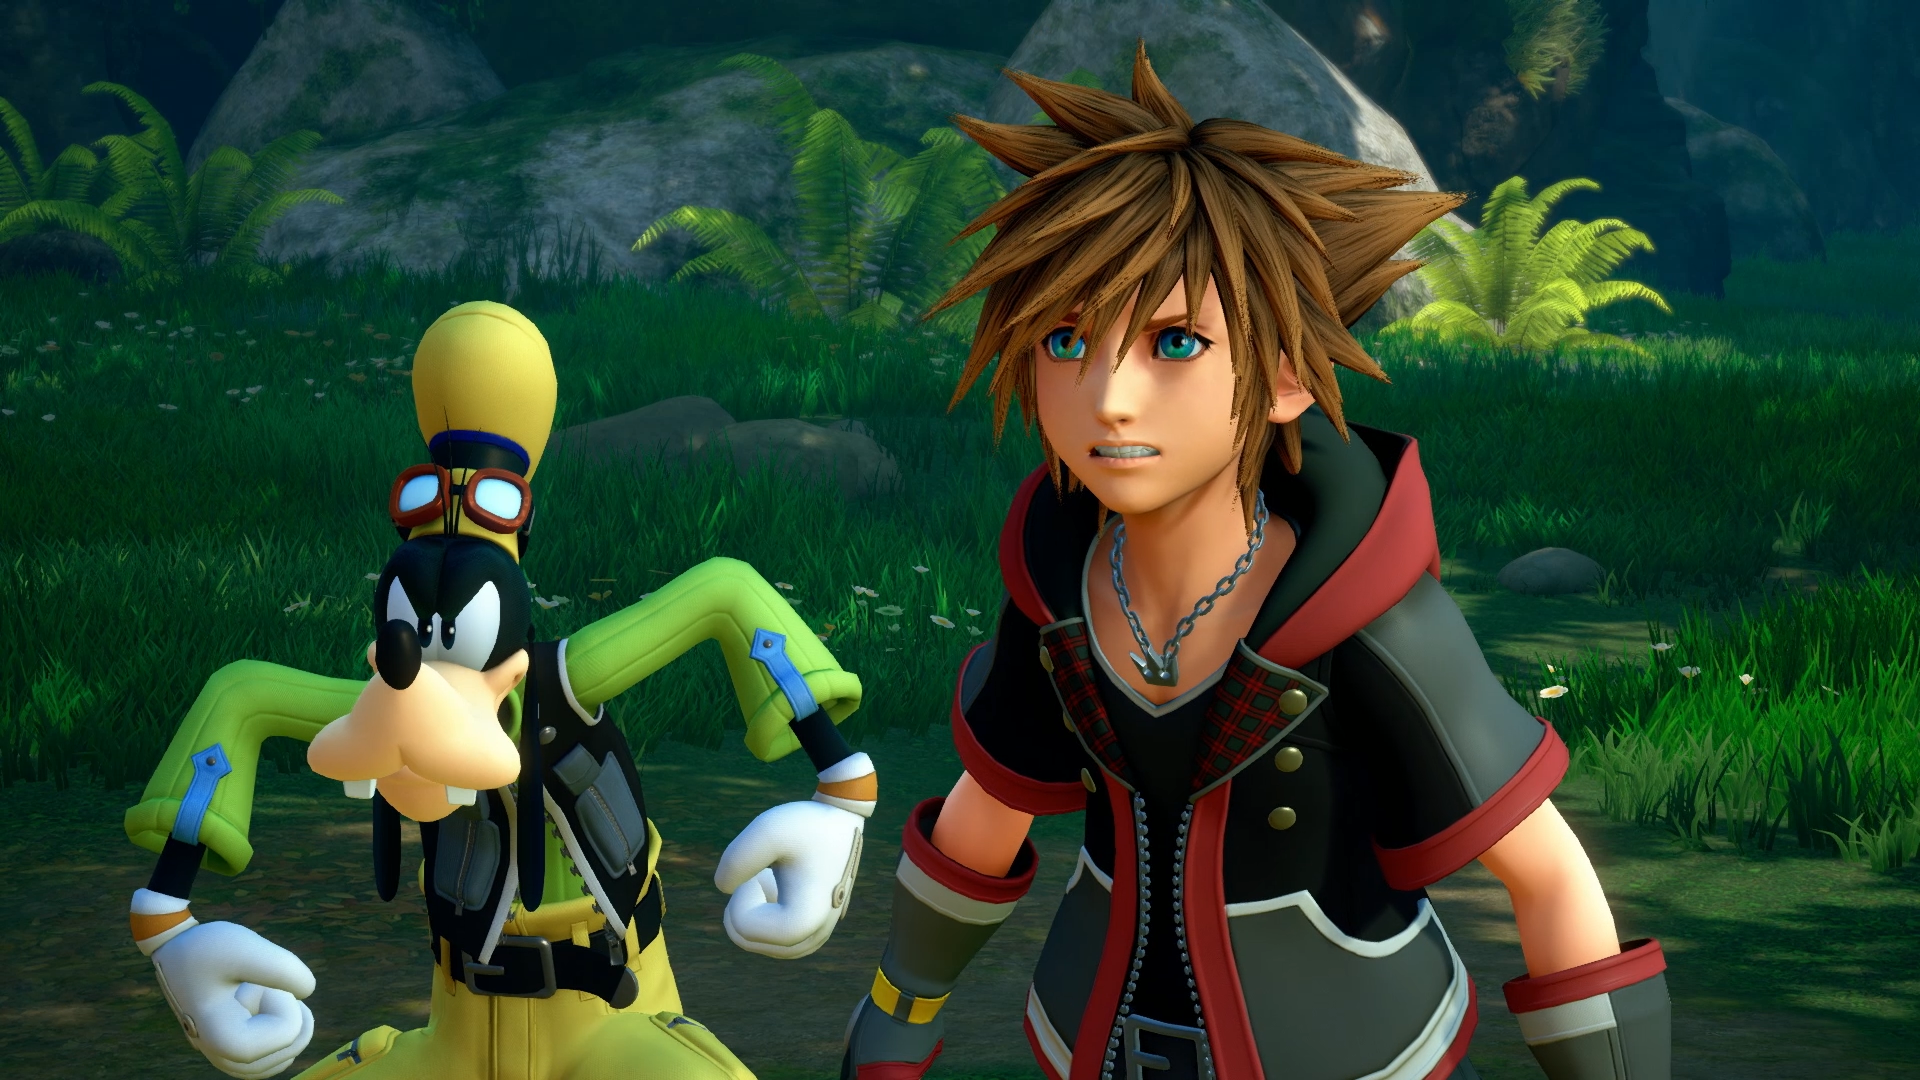 The Most 2019 Game of the Year: Kingdom Hearts III